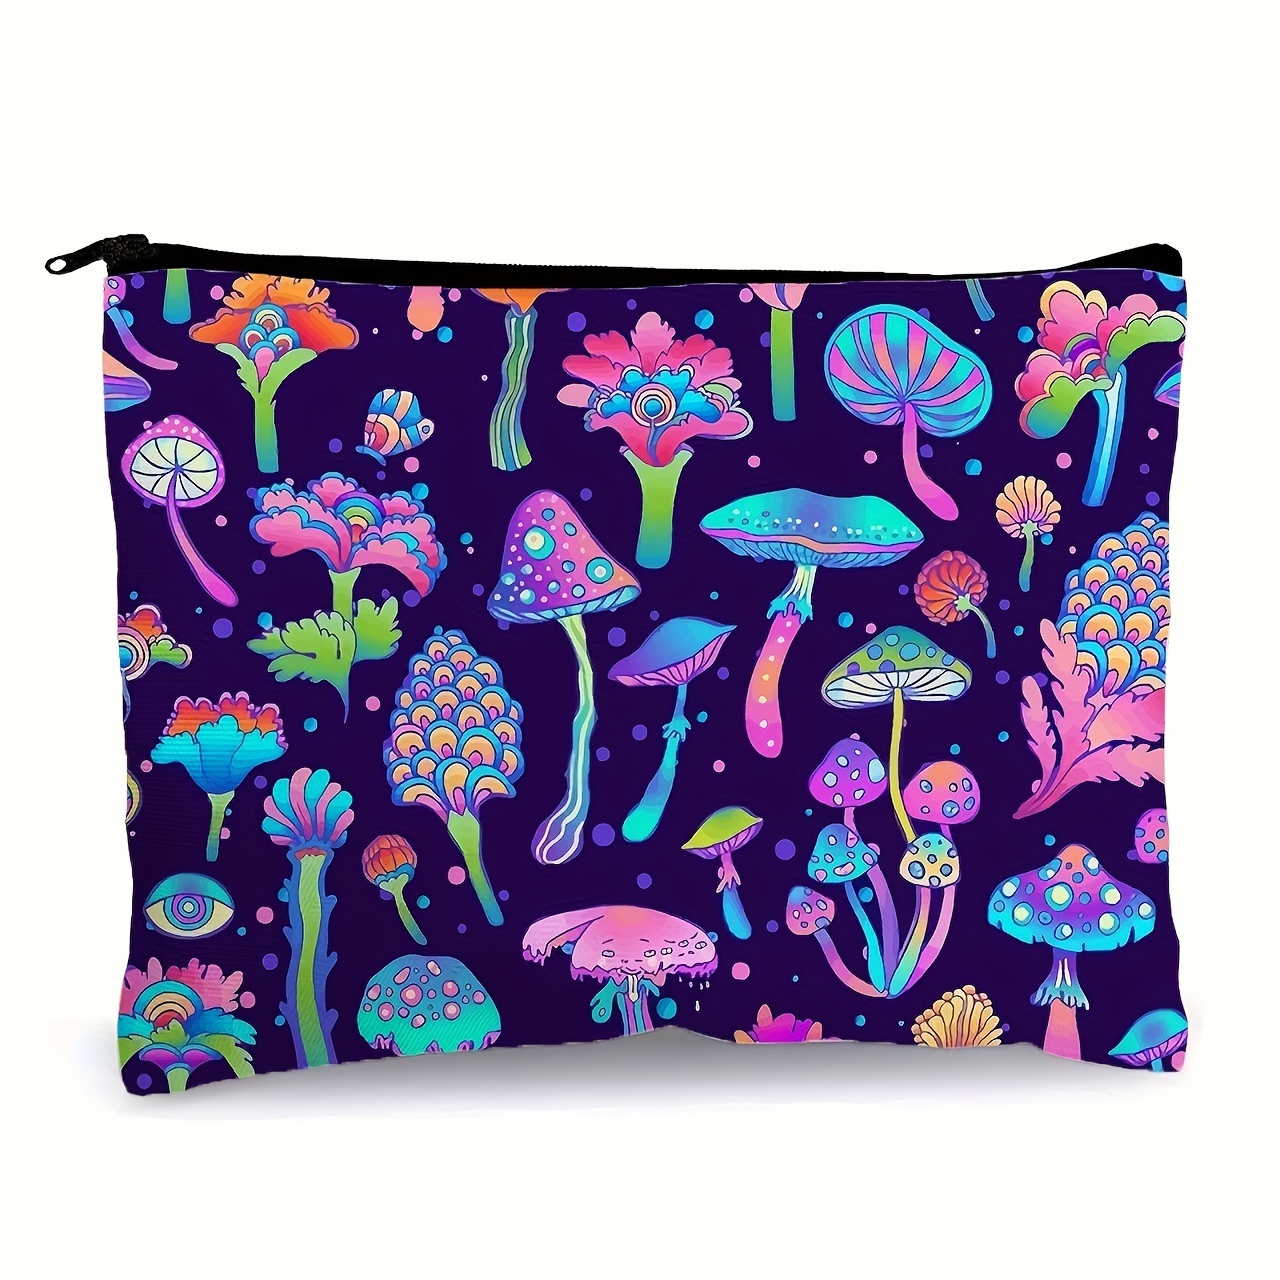 

Mushroom Printing Cosmetic Bag Makeup Bags Cute Travel Bag Birthday Gifts Friend Gifts For Women, Travel Essential Lightweight Makeup Organizer, Versatile Coin Purse